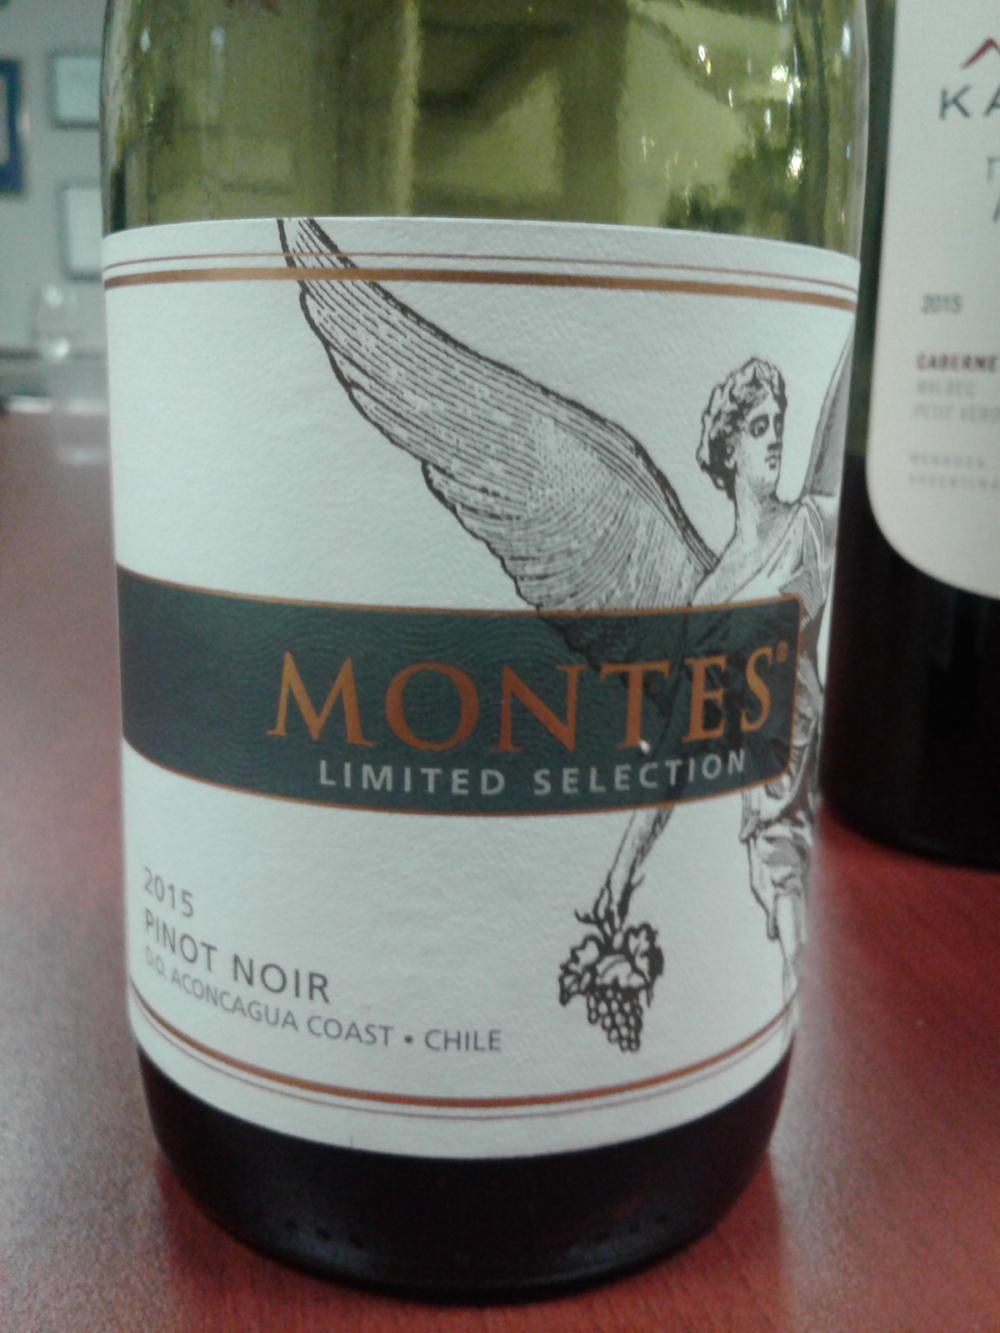 Montes Limited Selection Pinot Noir 2015, Chile